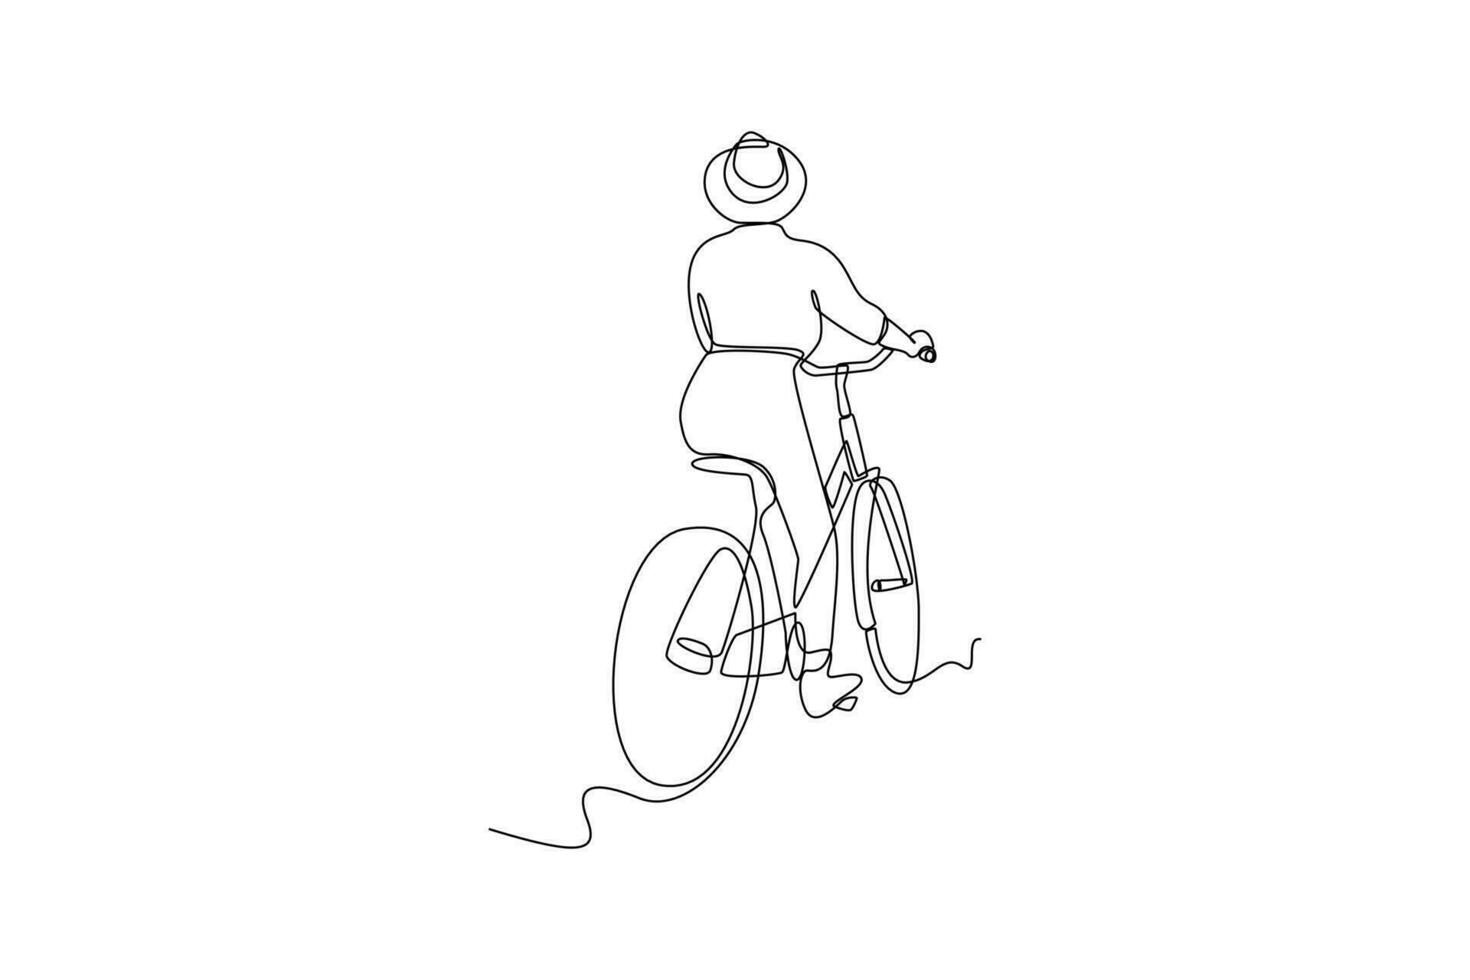 Single one line drawing World Bicycle Day on June 3. World bicycle day concept. Continuous line draw design graphic vector illustration.